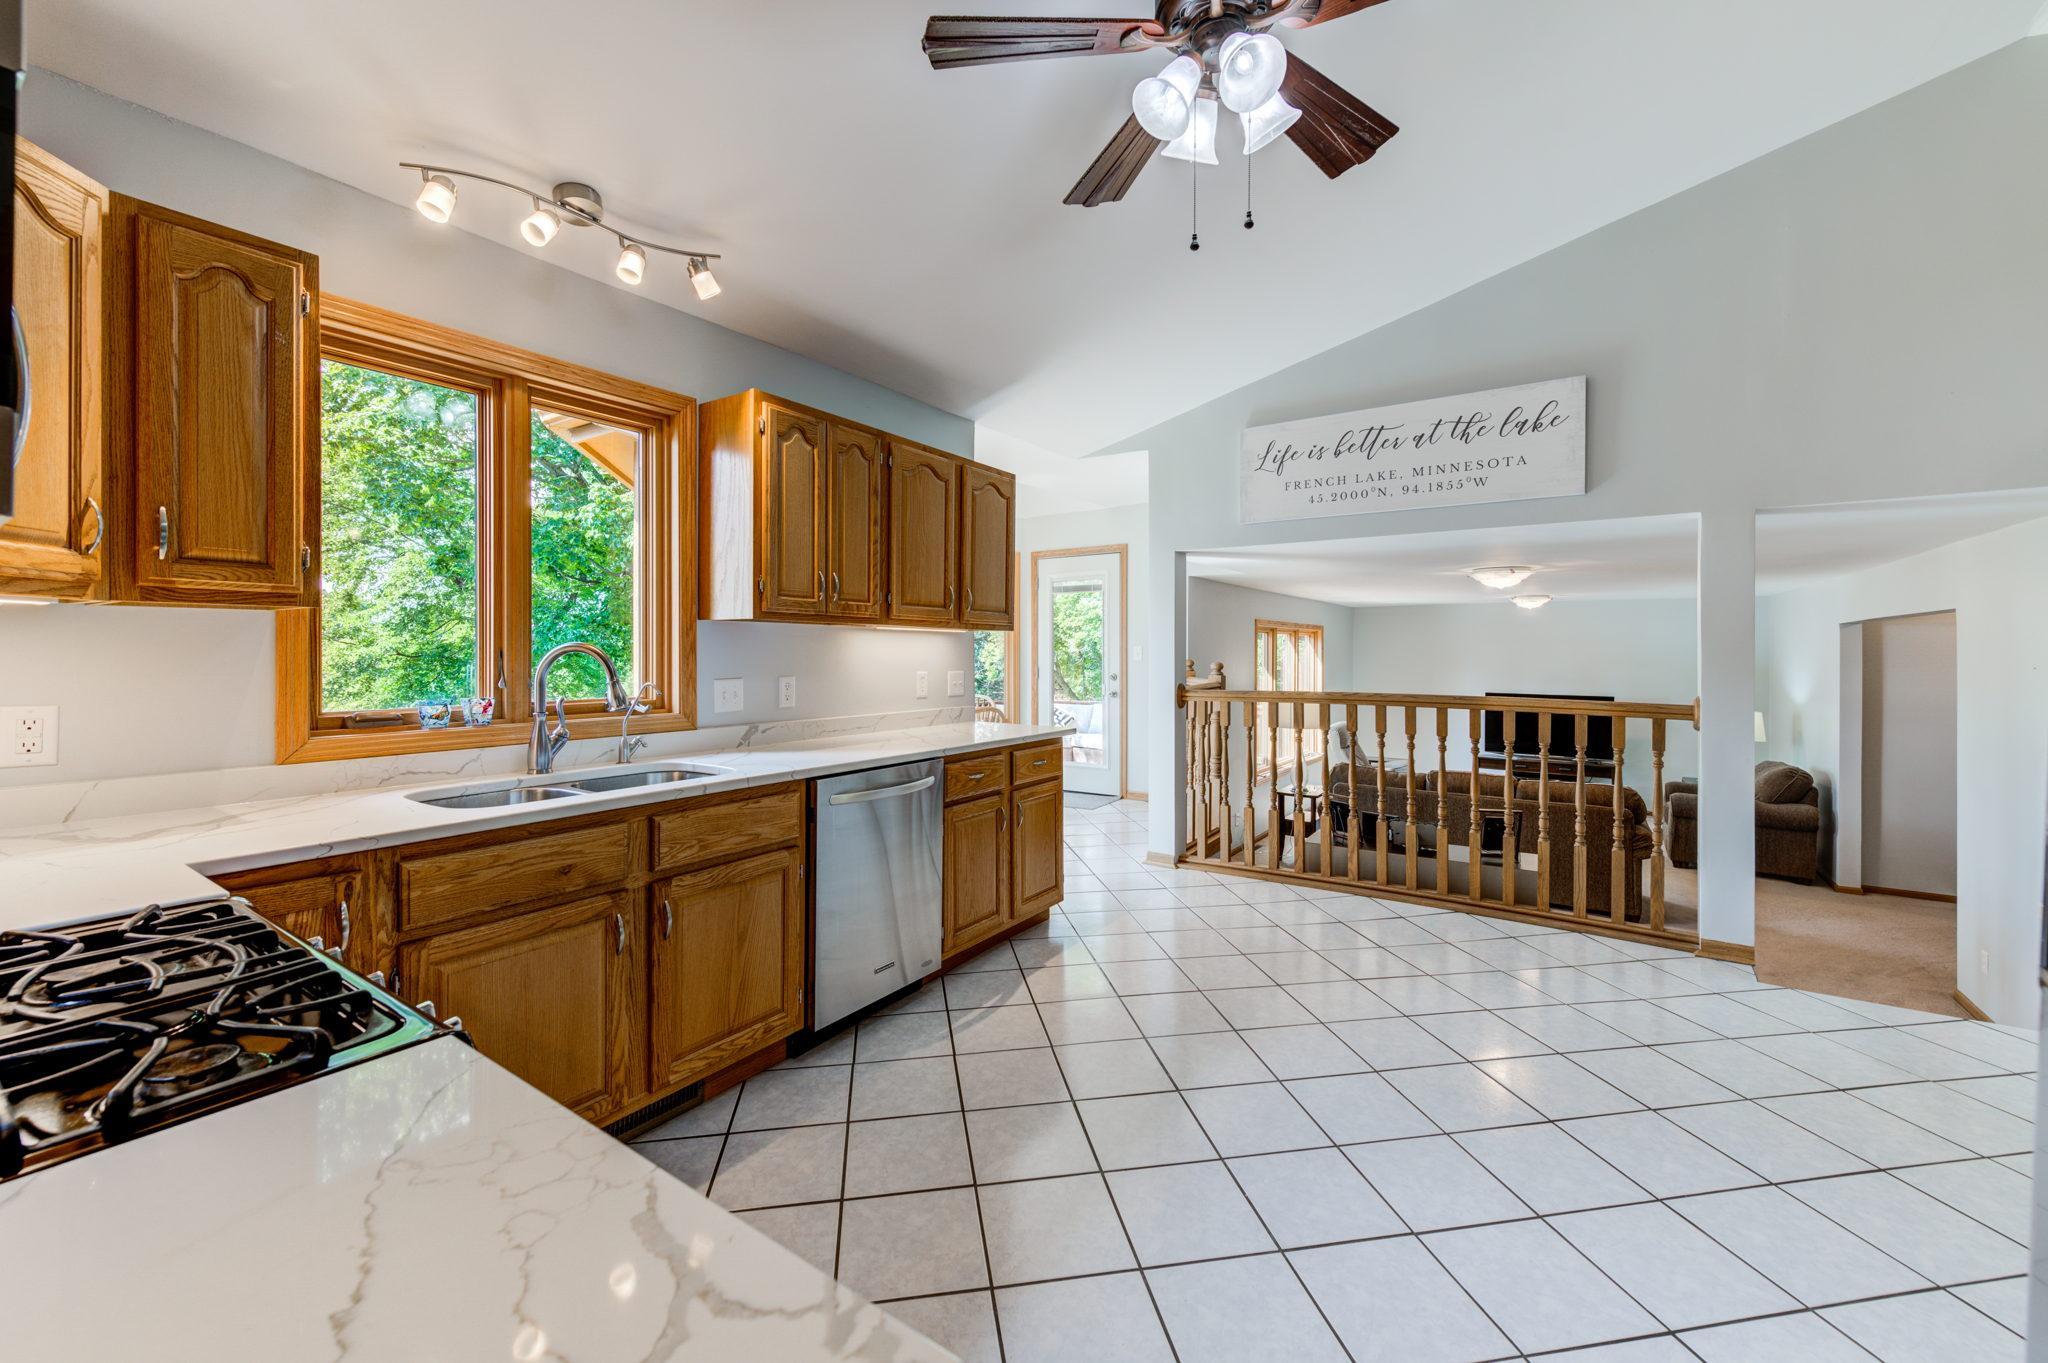 This spacious kitchen features tile floors, granite countertops and plenty of prep/storage space. This great location is less than 4 miles to town for shopping, schools and entertainment.